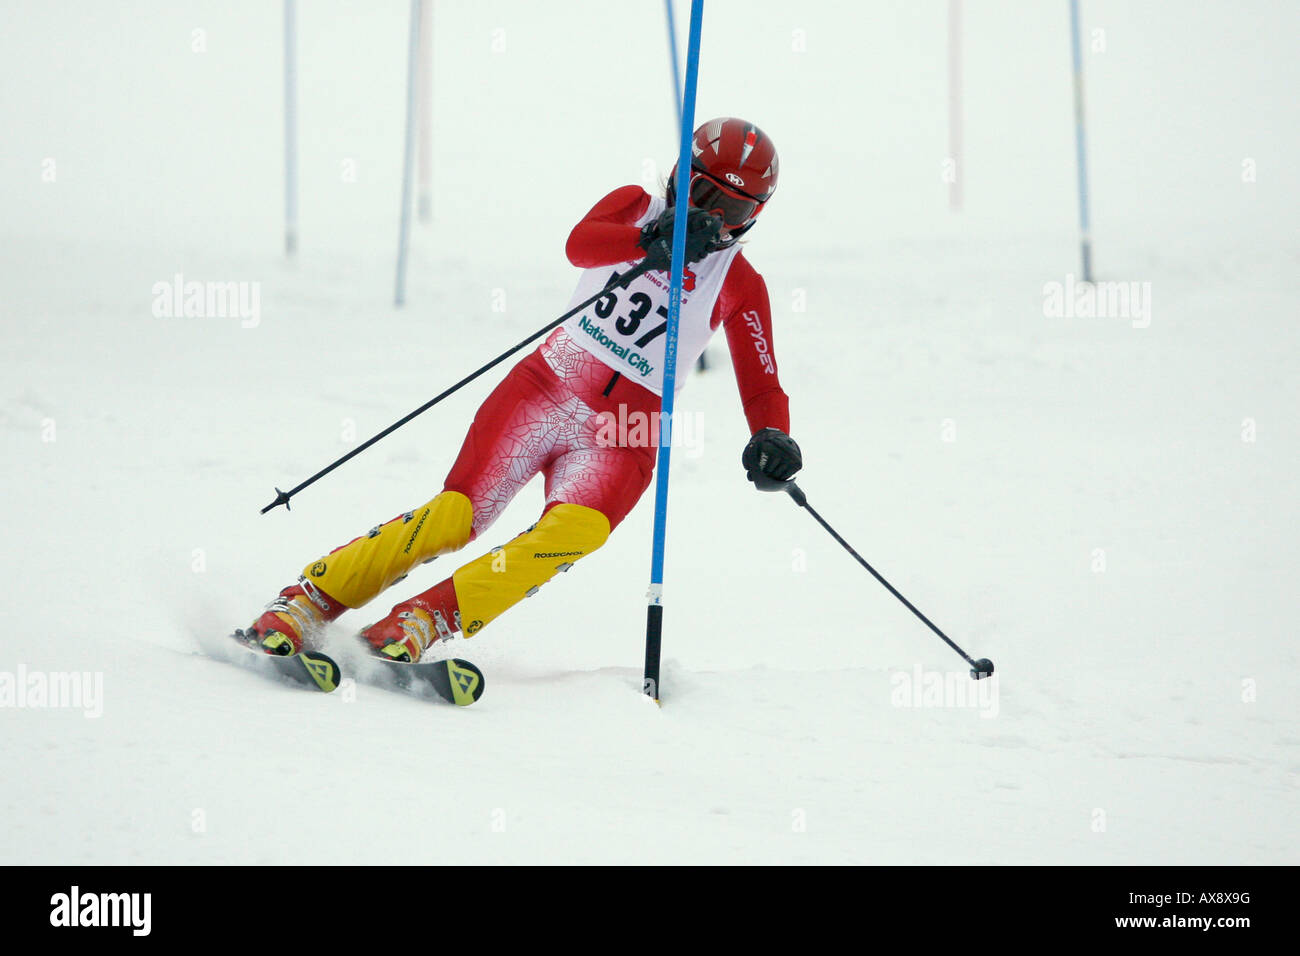 A skier turning at a gate in a downhill slalom race Stock Photo